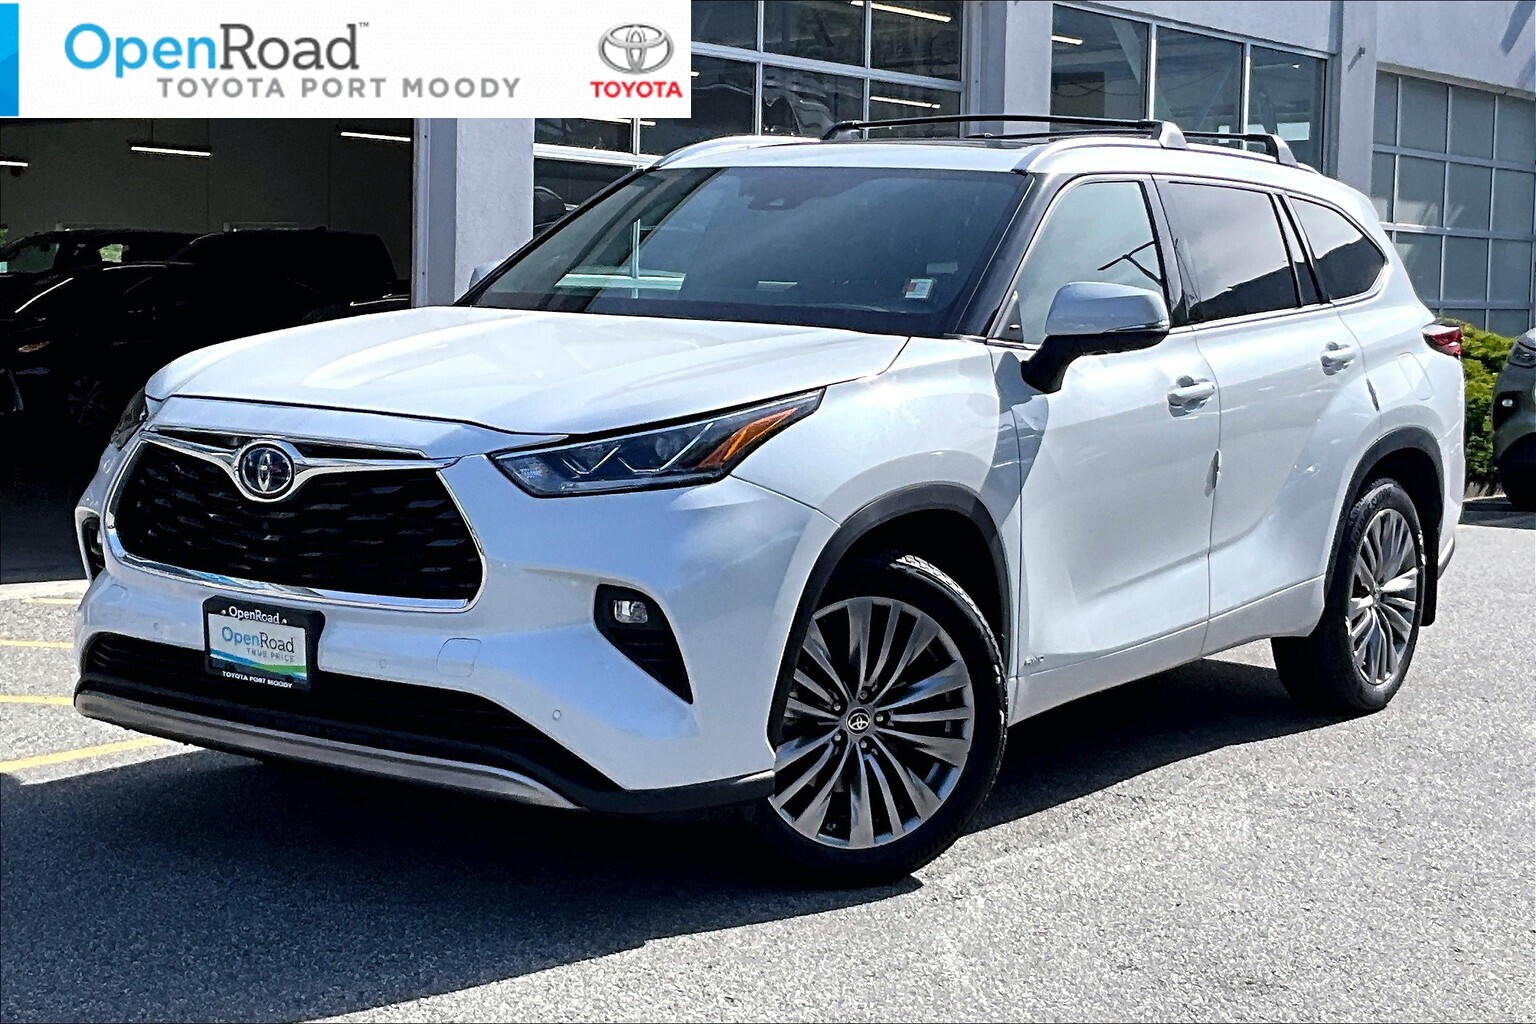 2022 Toyota Highlander Hybrid Limited AWD |OpenRoad True Price |Local |One Owner